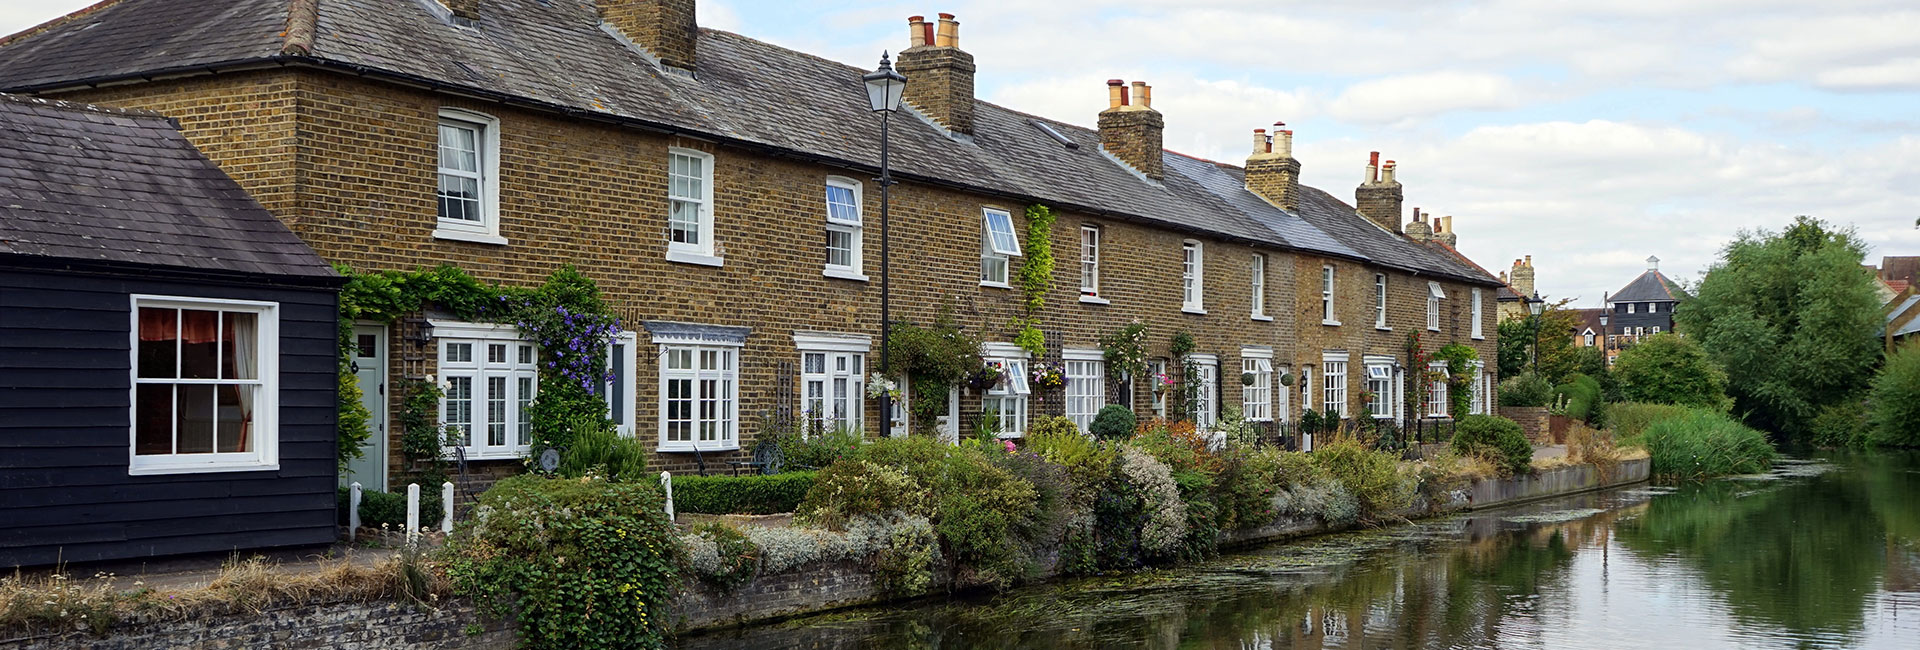 Row of cottages next to a river - Property Activity Reports